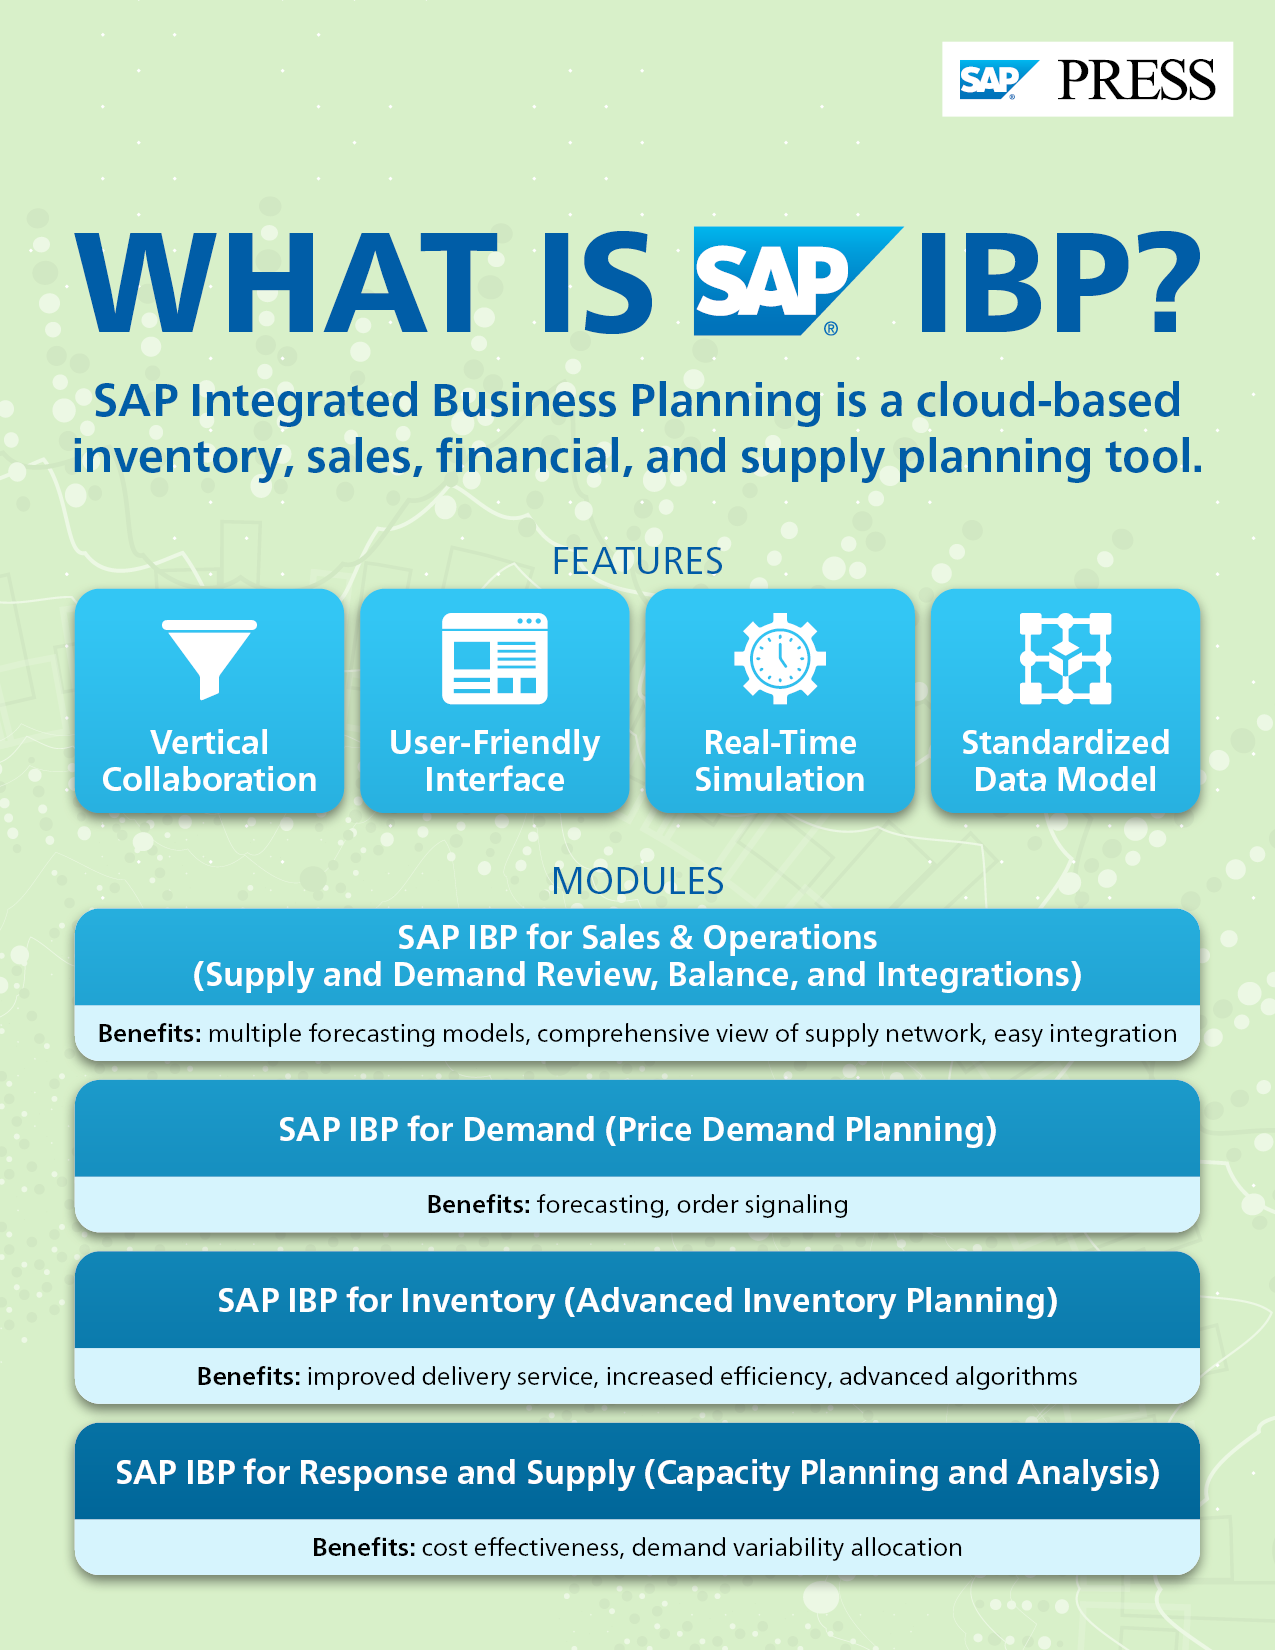 What Is SAP IBP?